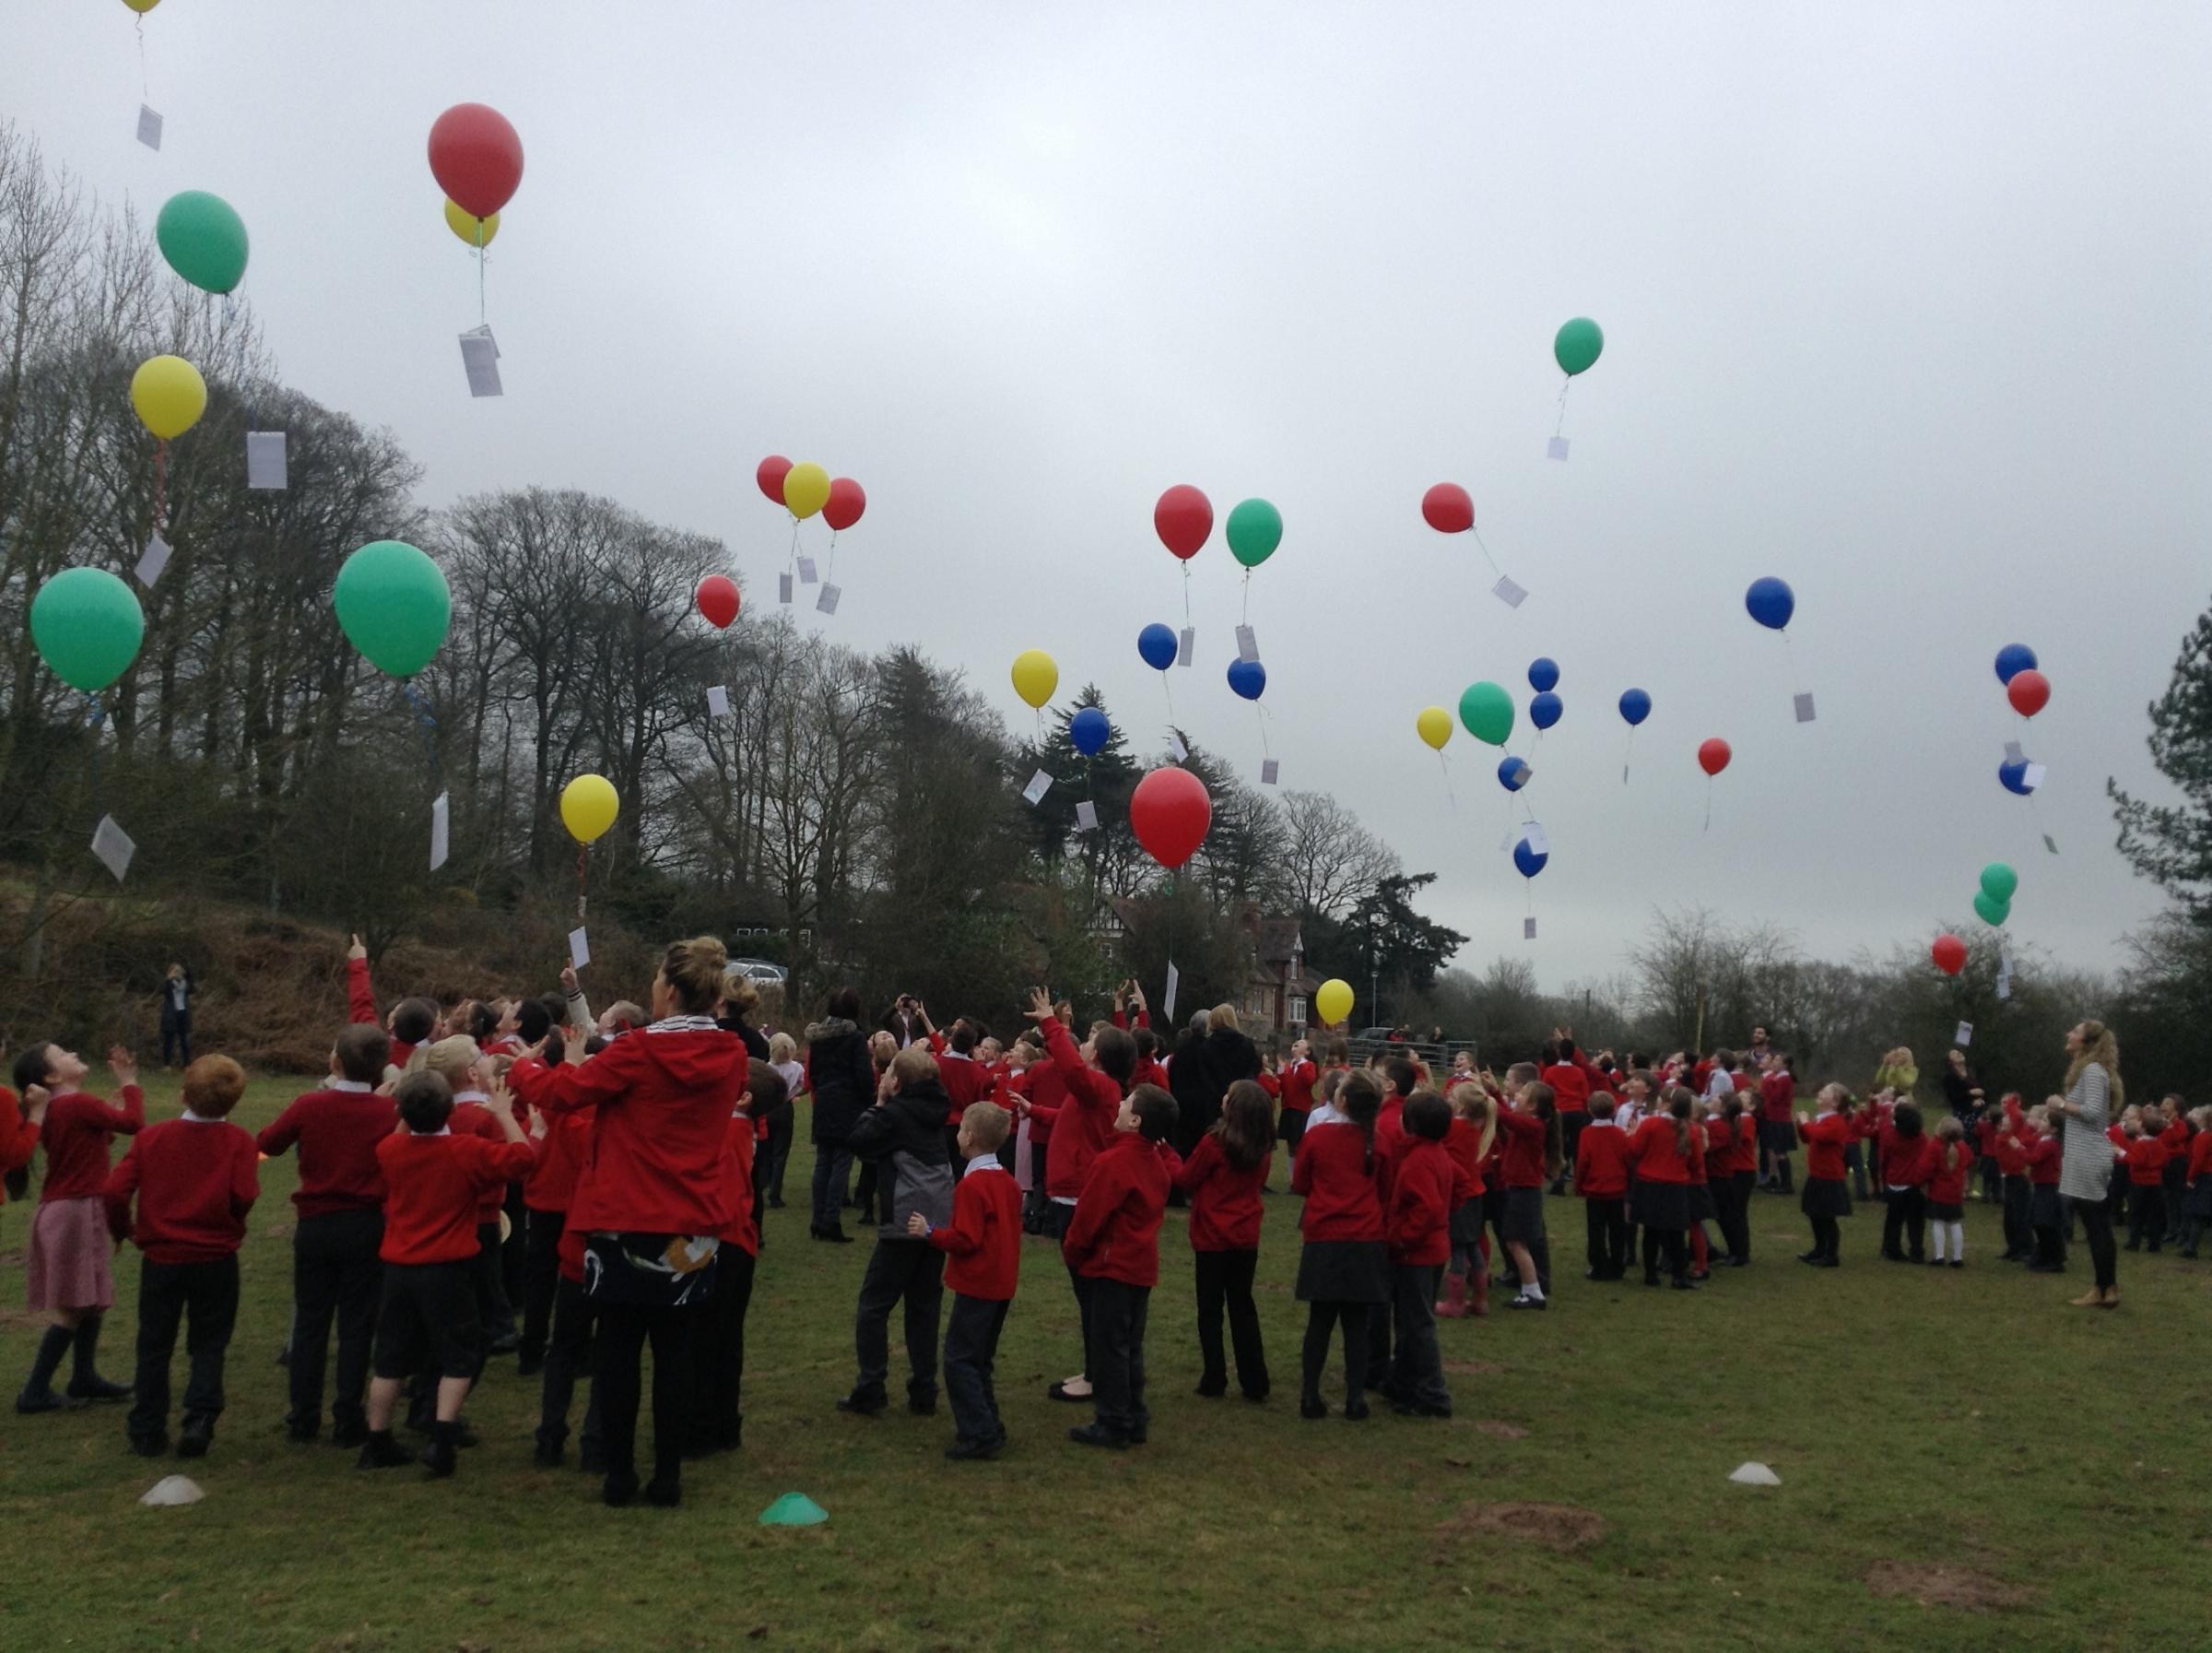 Celebrating World Maths Day with a balloon release